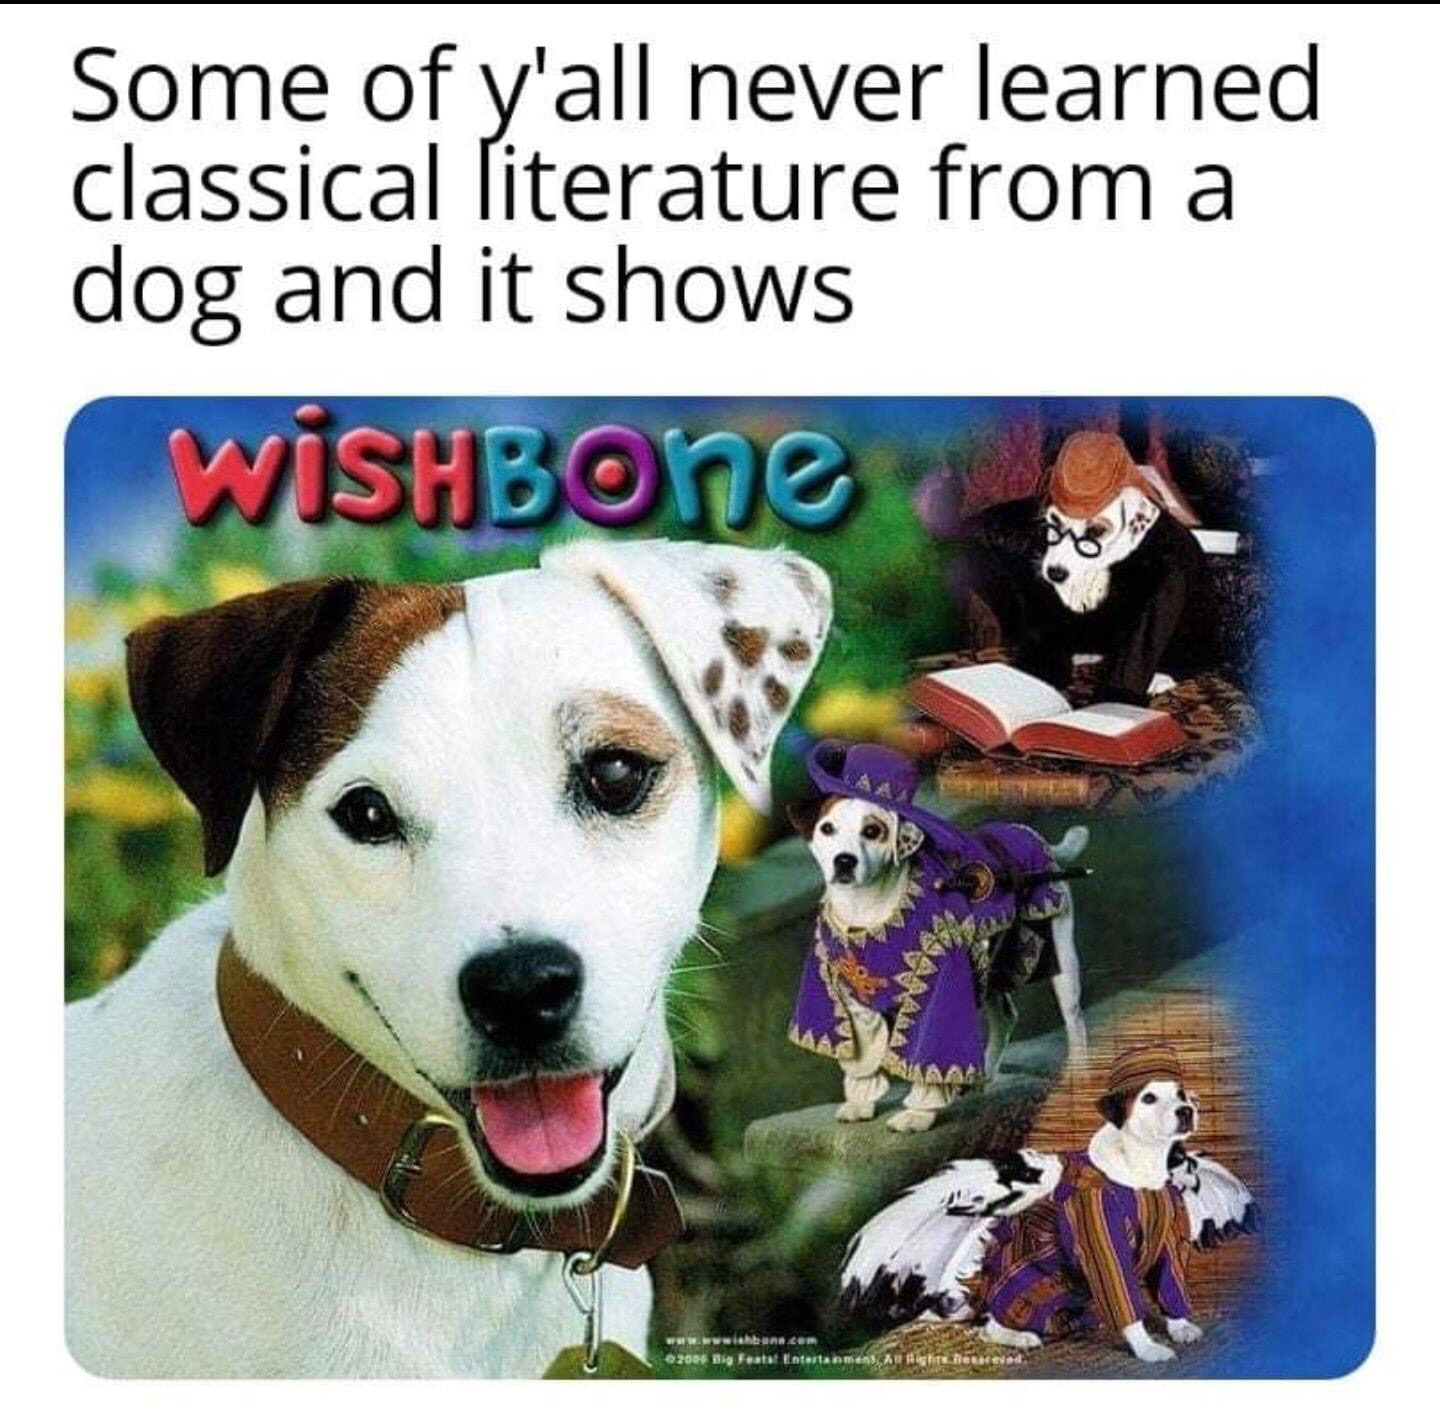 wishbone dog meme - Some of y'all never learned classical literature from a dog and it shows Wishbone Orce 2005 Featut Entertasme, gh